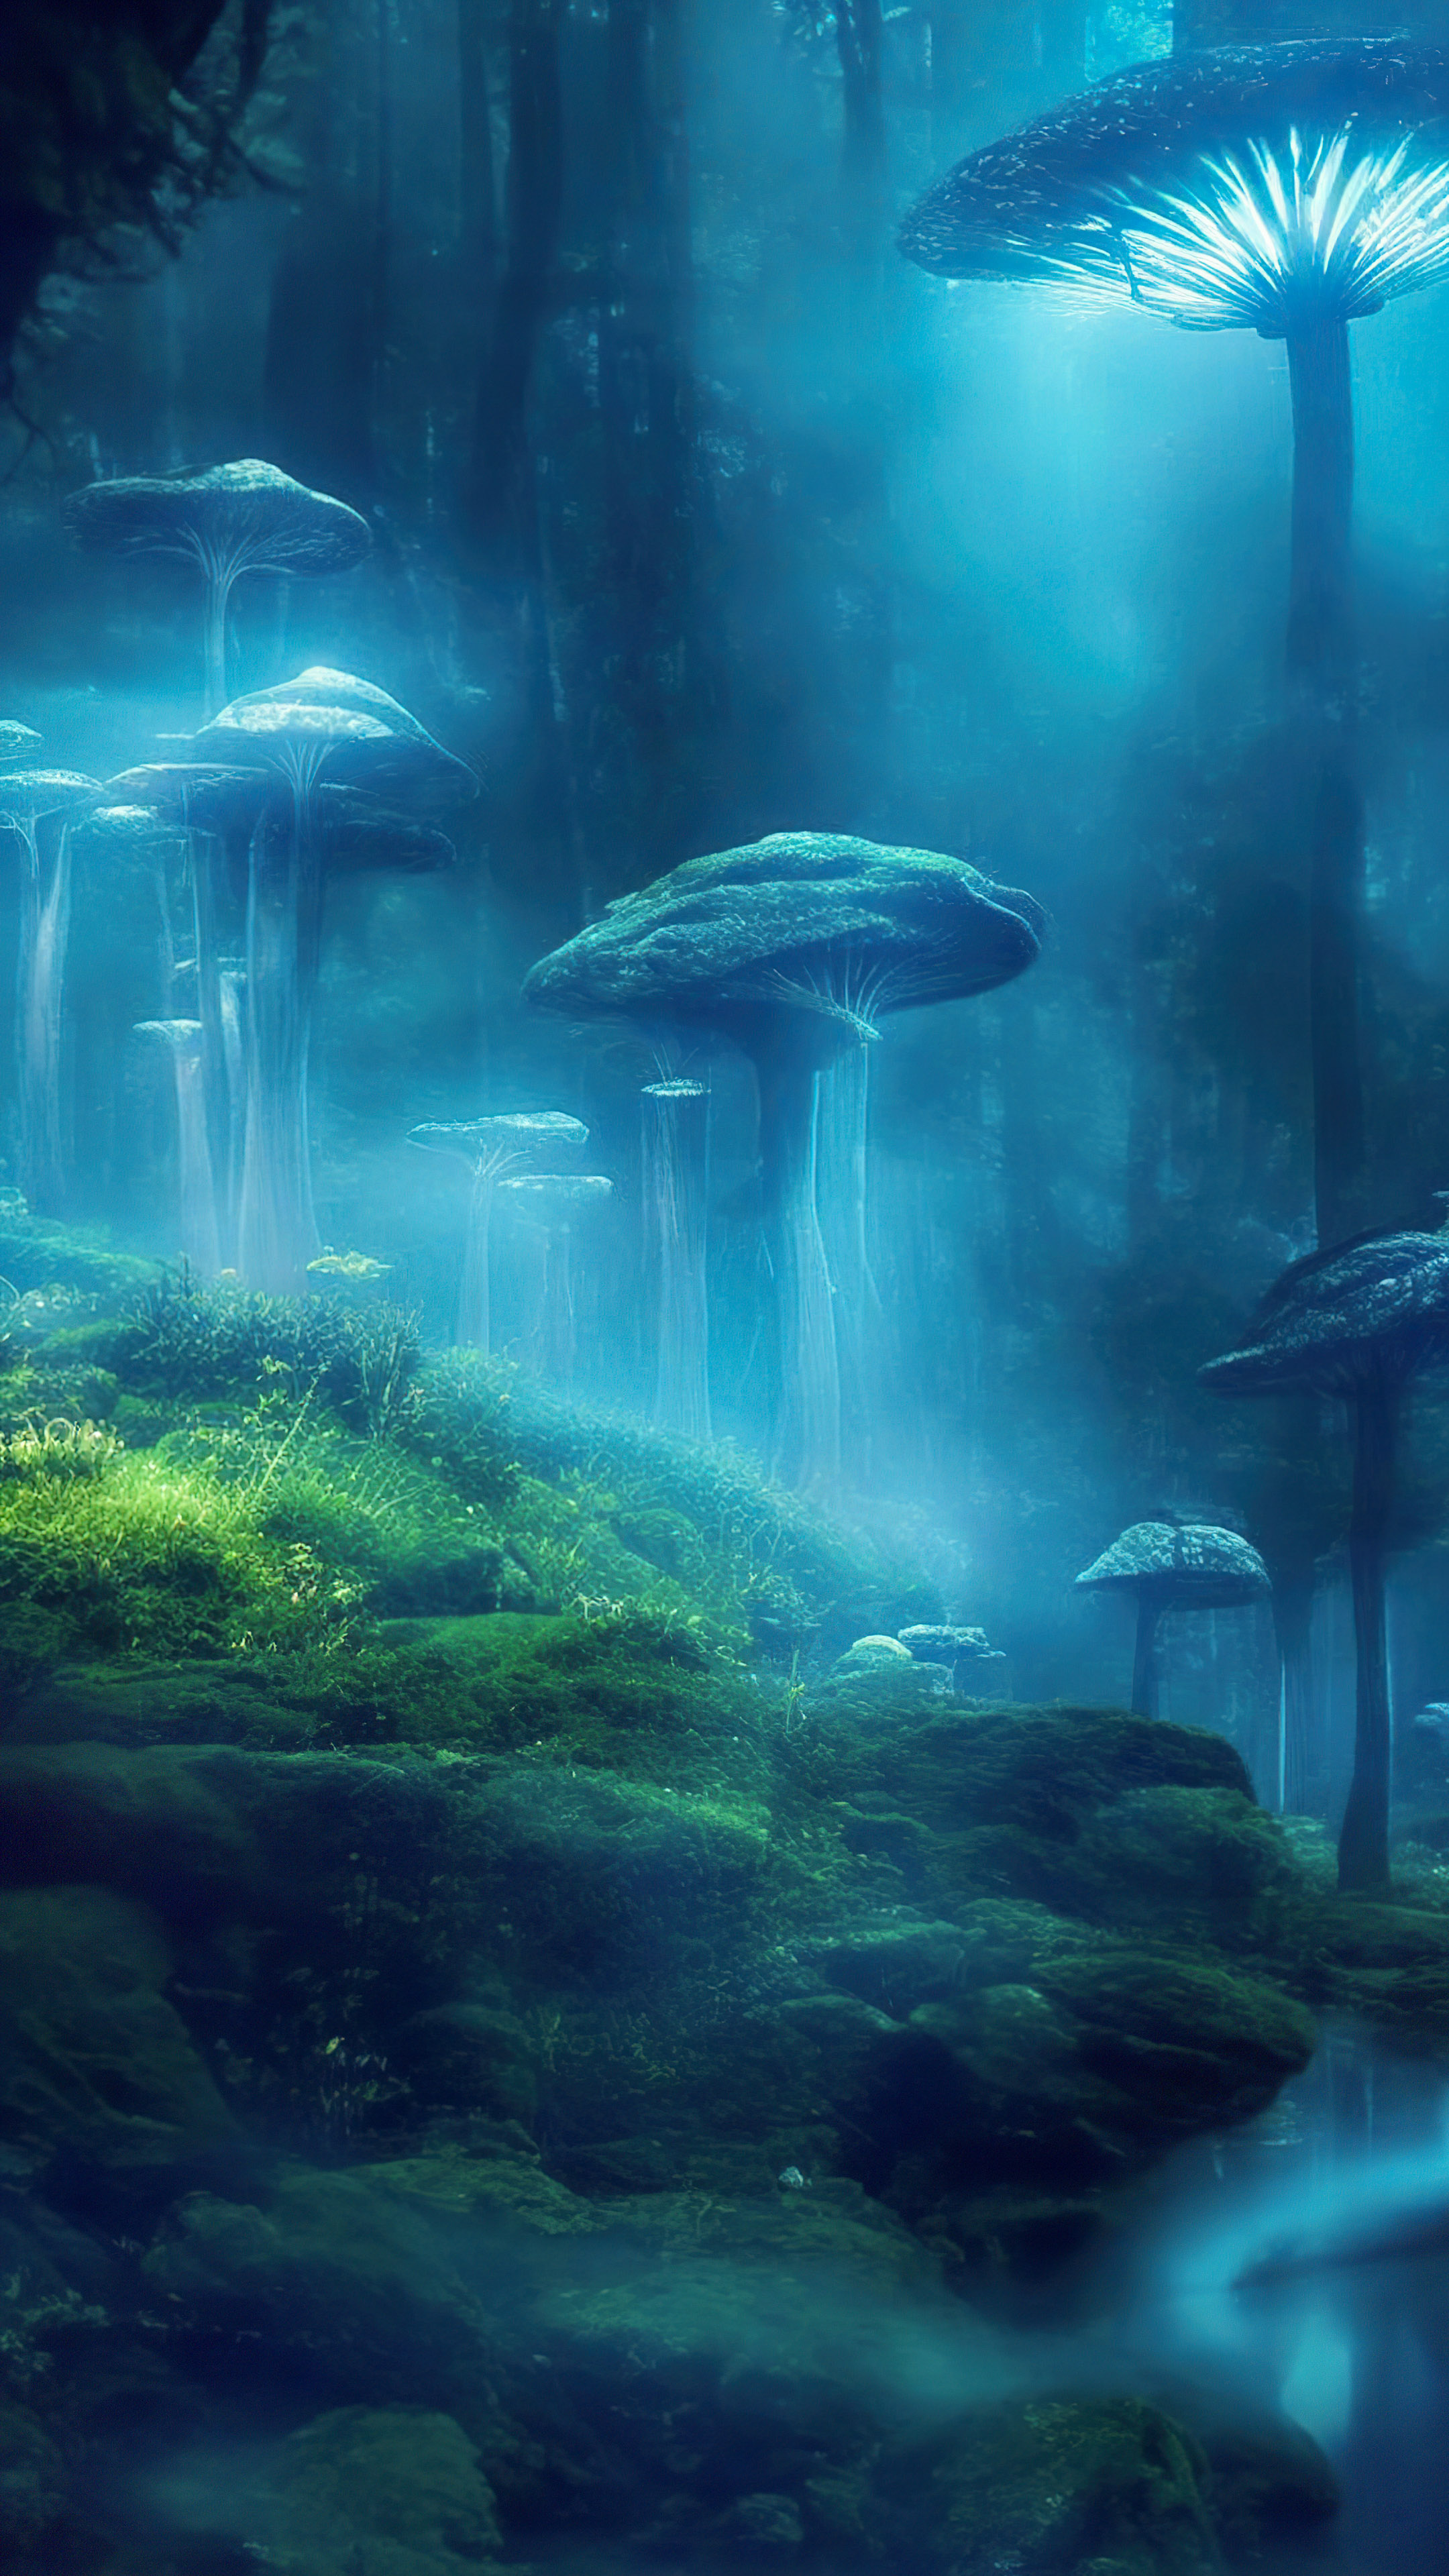 Bring the beauty of a mystical glen to your iPhone with our beautiful nature wallpaper, showcasing bioluminescent mushrooms that create an enchanting, otherworldly scene.